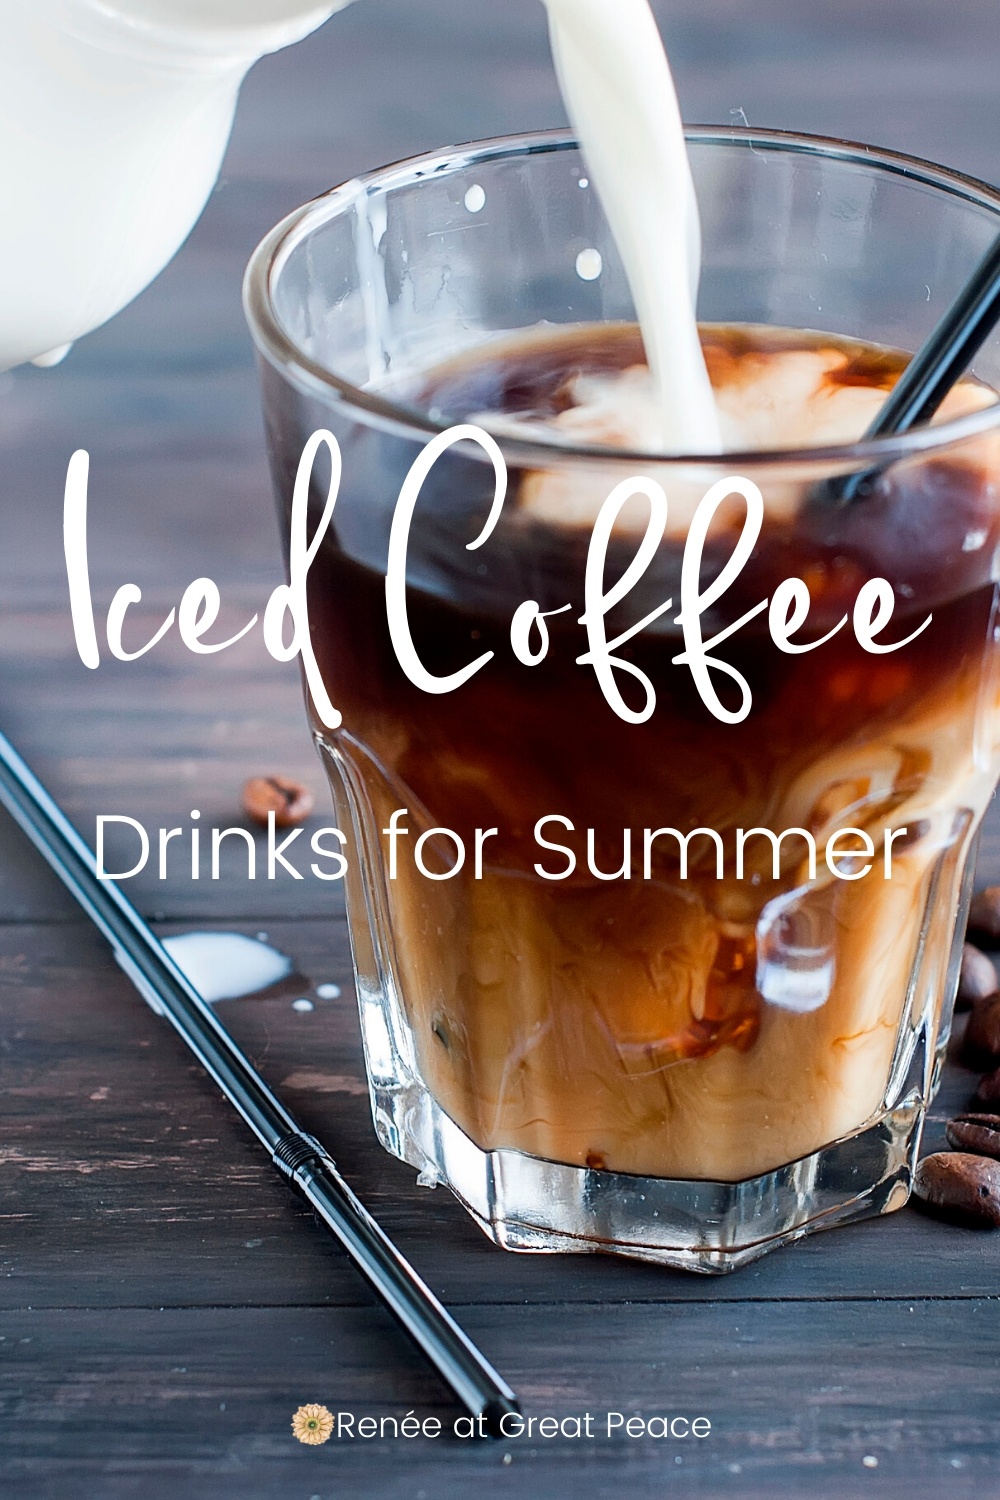 Iced Coffee Drinks You Have to Try for Summer